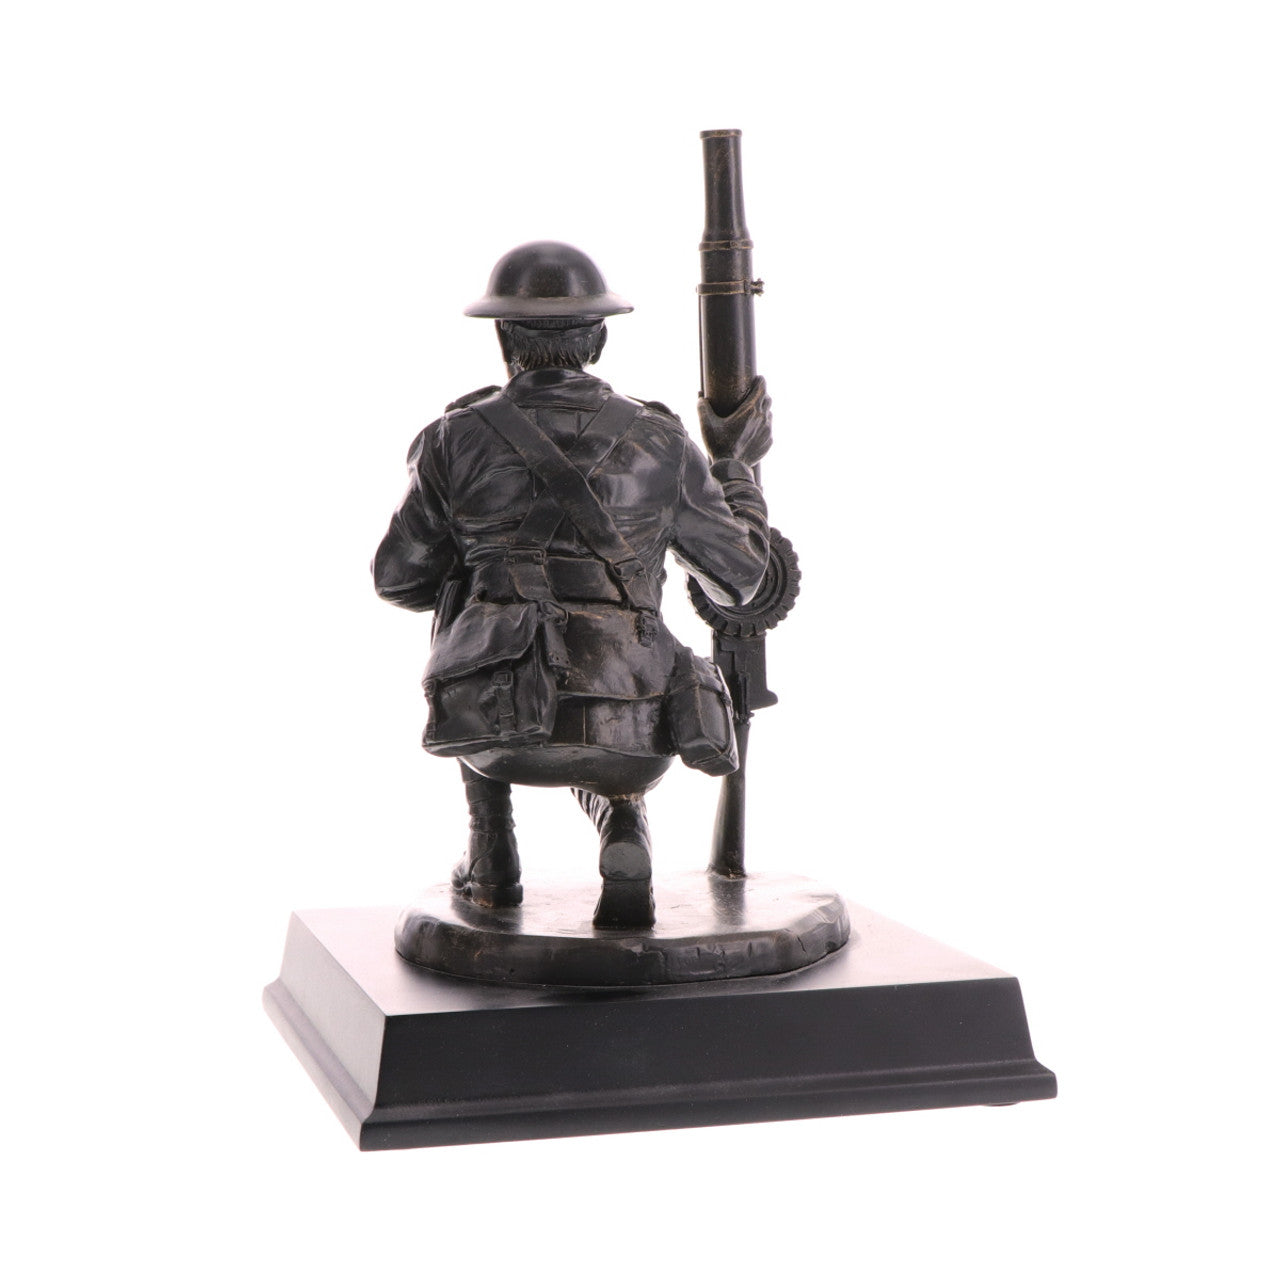 The limited edition Australian Machine Gun Company figurine is a true piece of military history. In 1916, the Australian Imperial Forces revolutionized infantry tactics with the adoption of the lighter air-cooled Lewis Gun. www.defenceqstore.com.au